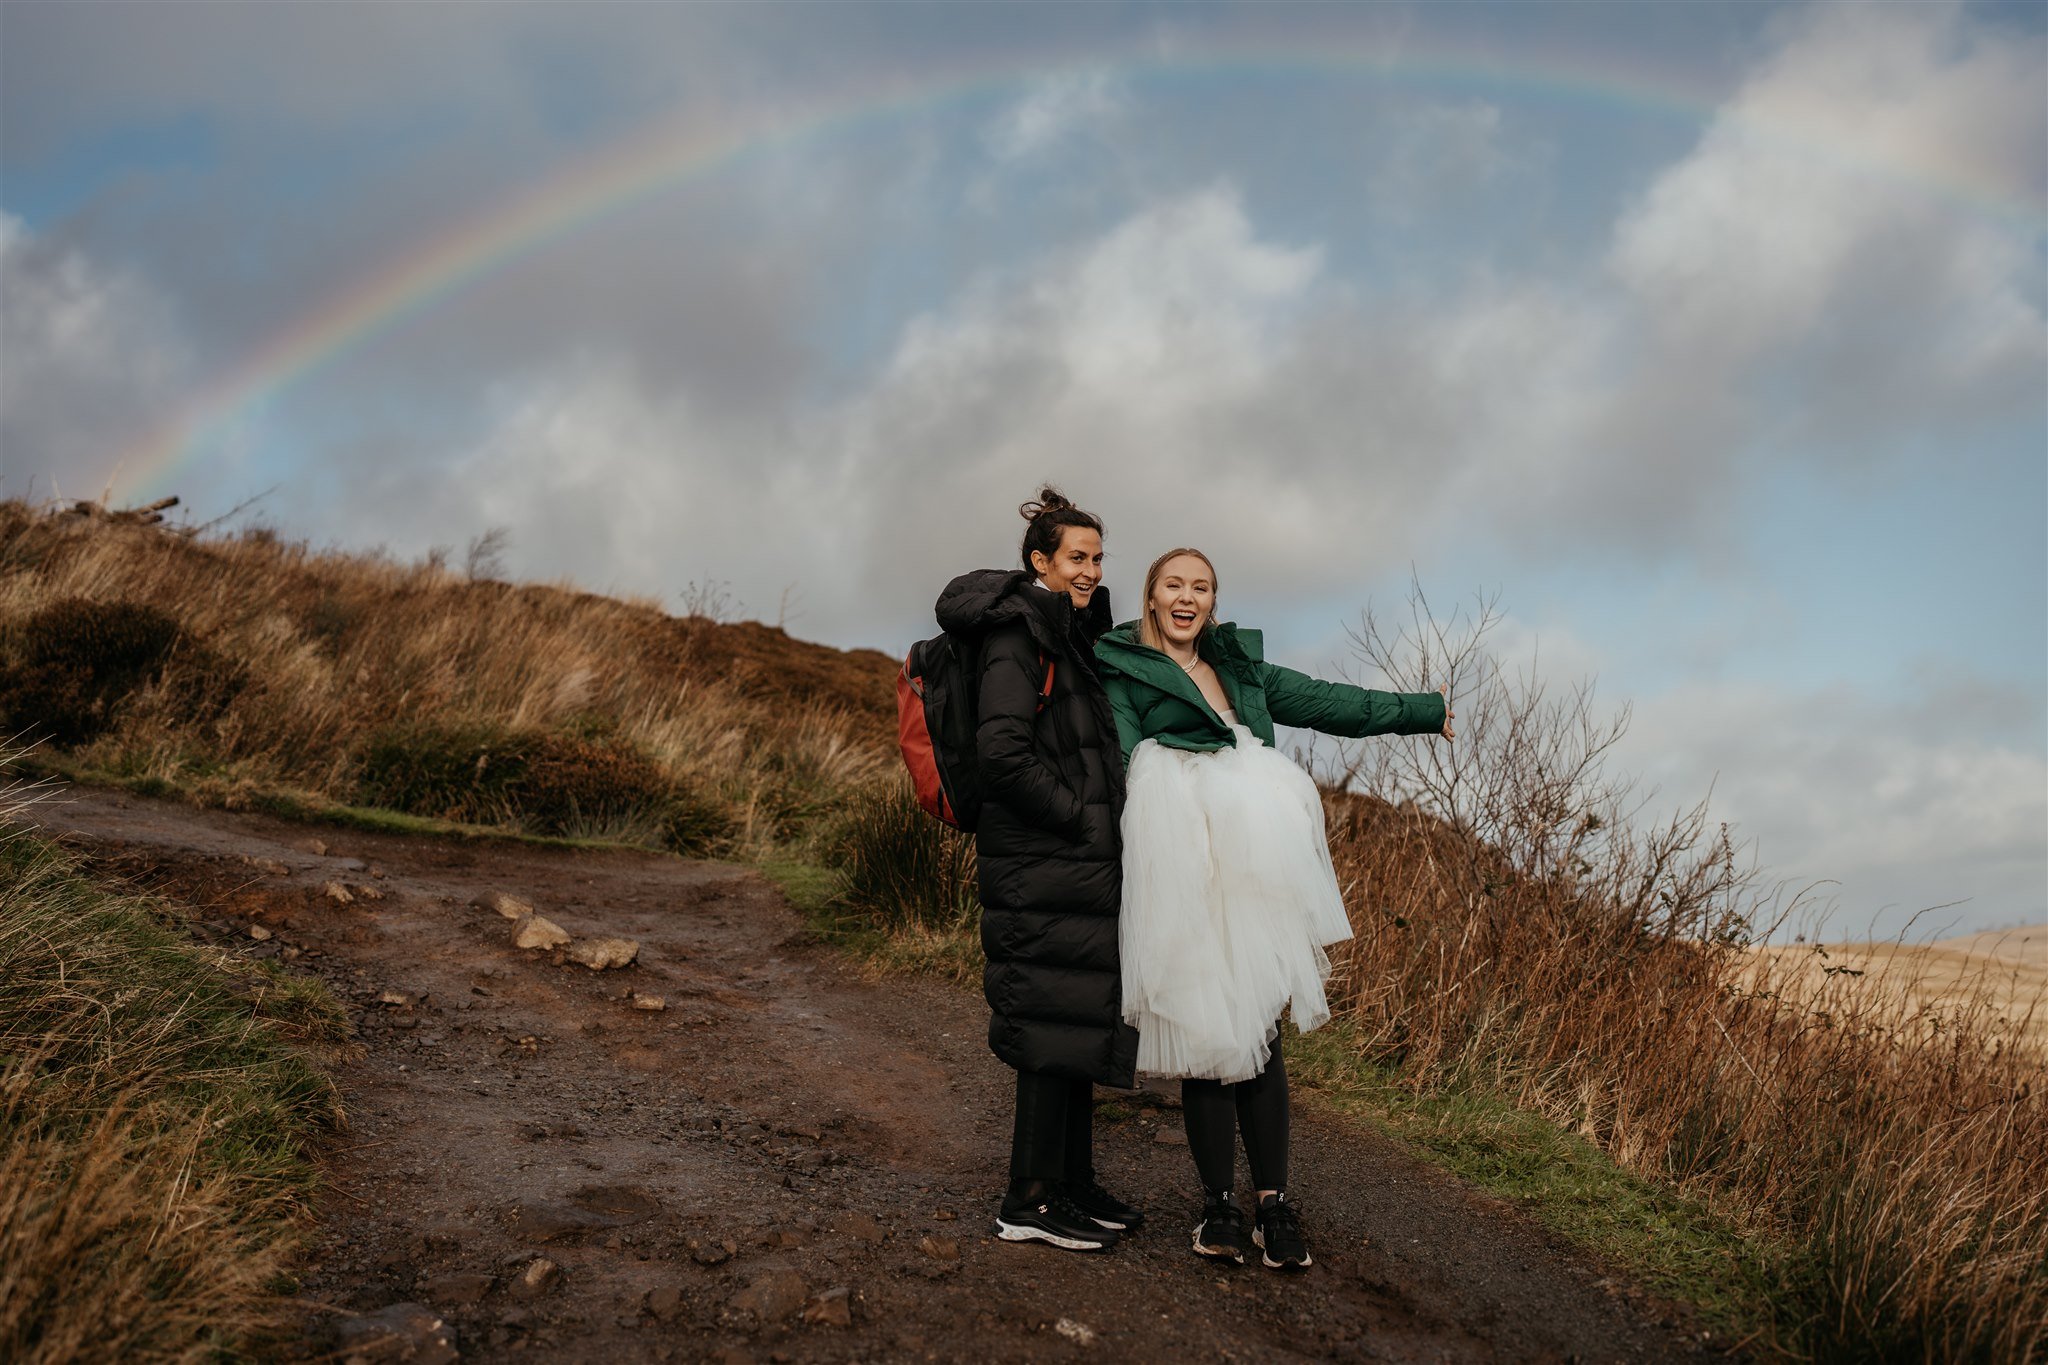 Rainbow in the sky arching over two brides hiking to their elopement ceremony on the Isle of Skye